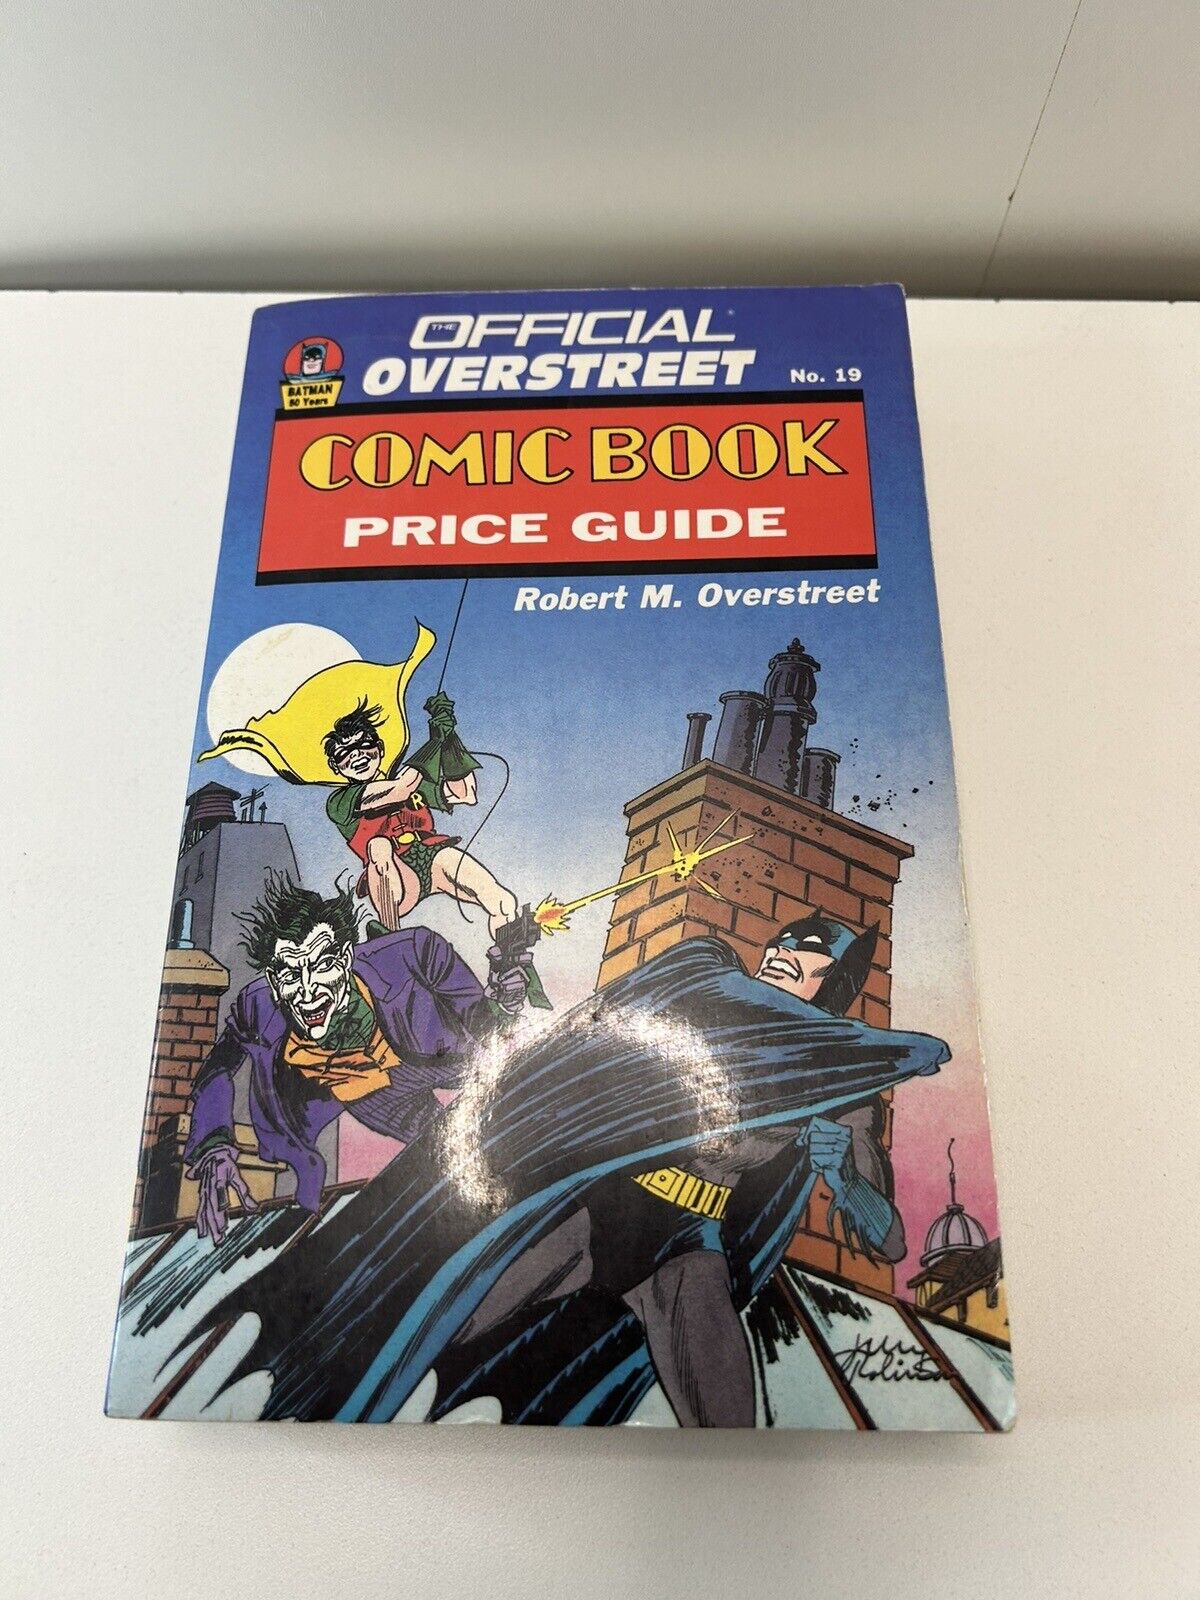 OVERSTREET COMIC BOOK PRICE GUIDE Number 19. 19 Edition